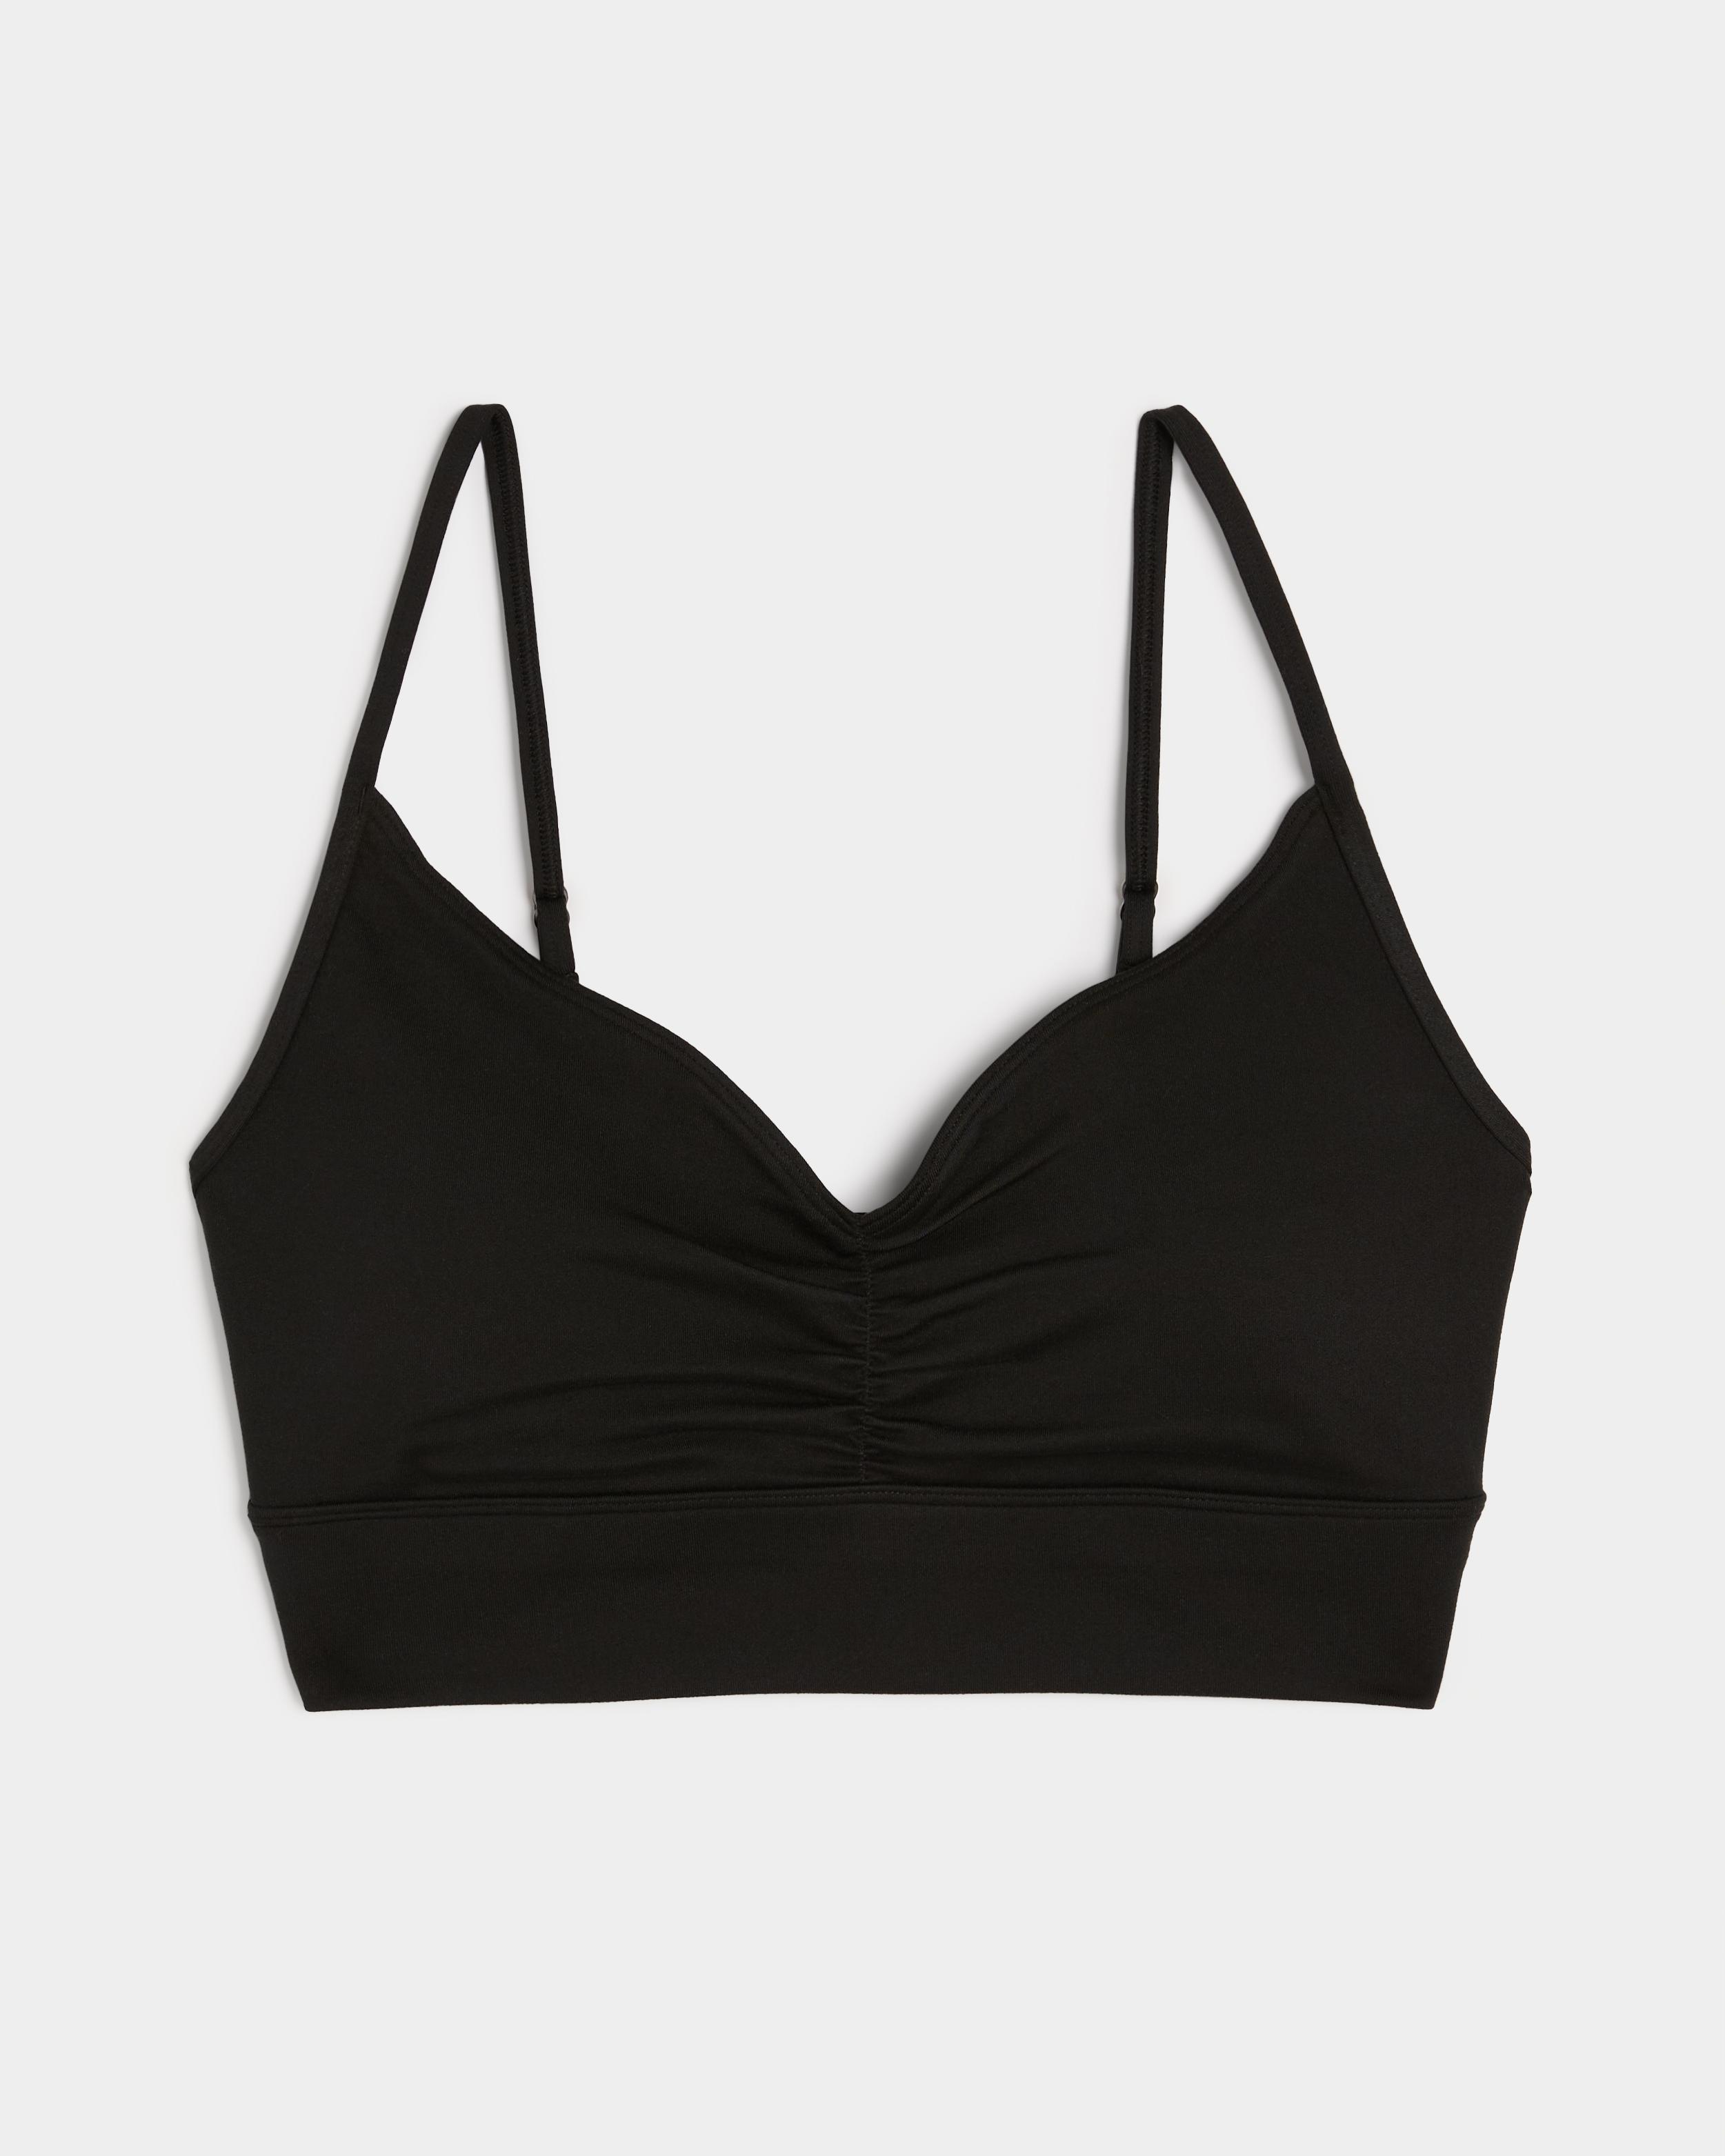 Hollister Gilly Hicks Active Cinched Sweetheart Top in Black